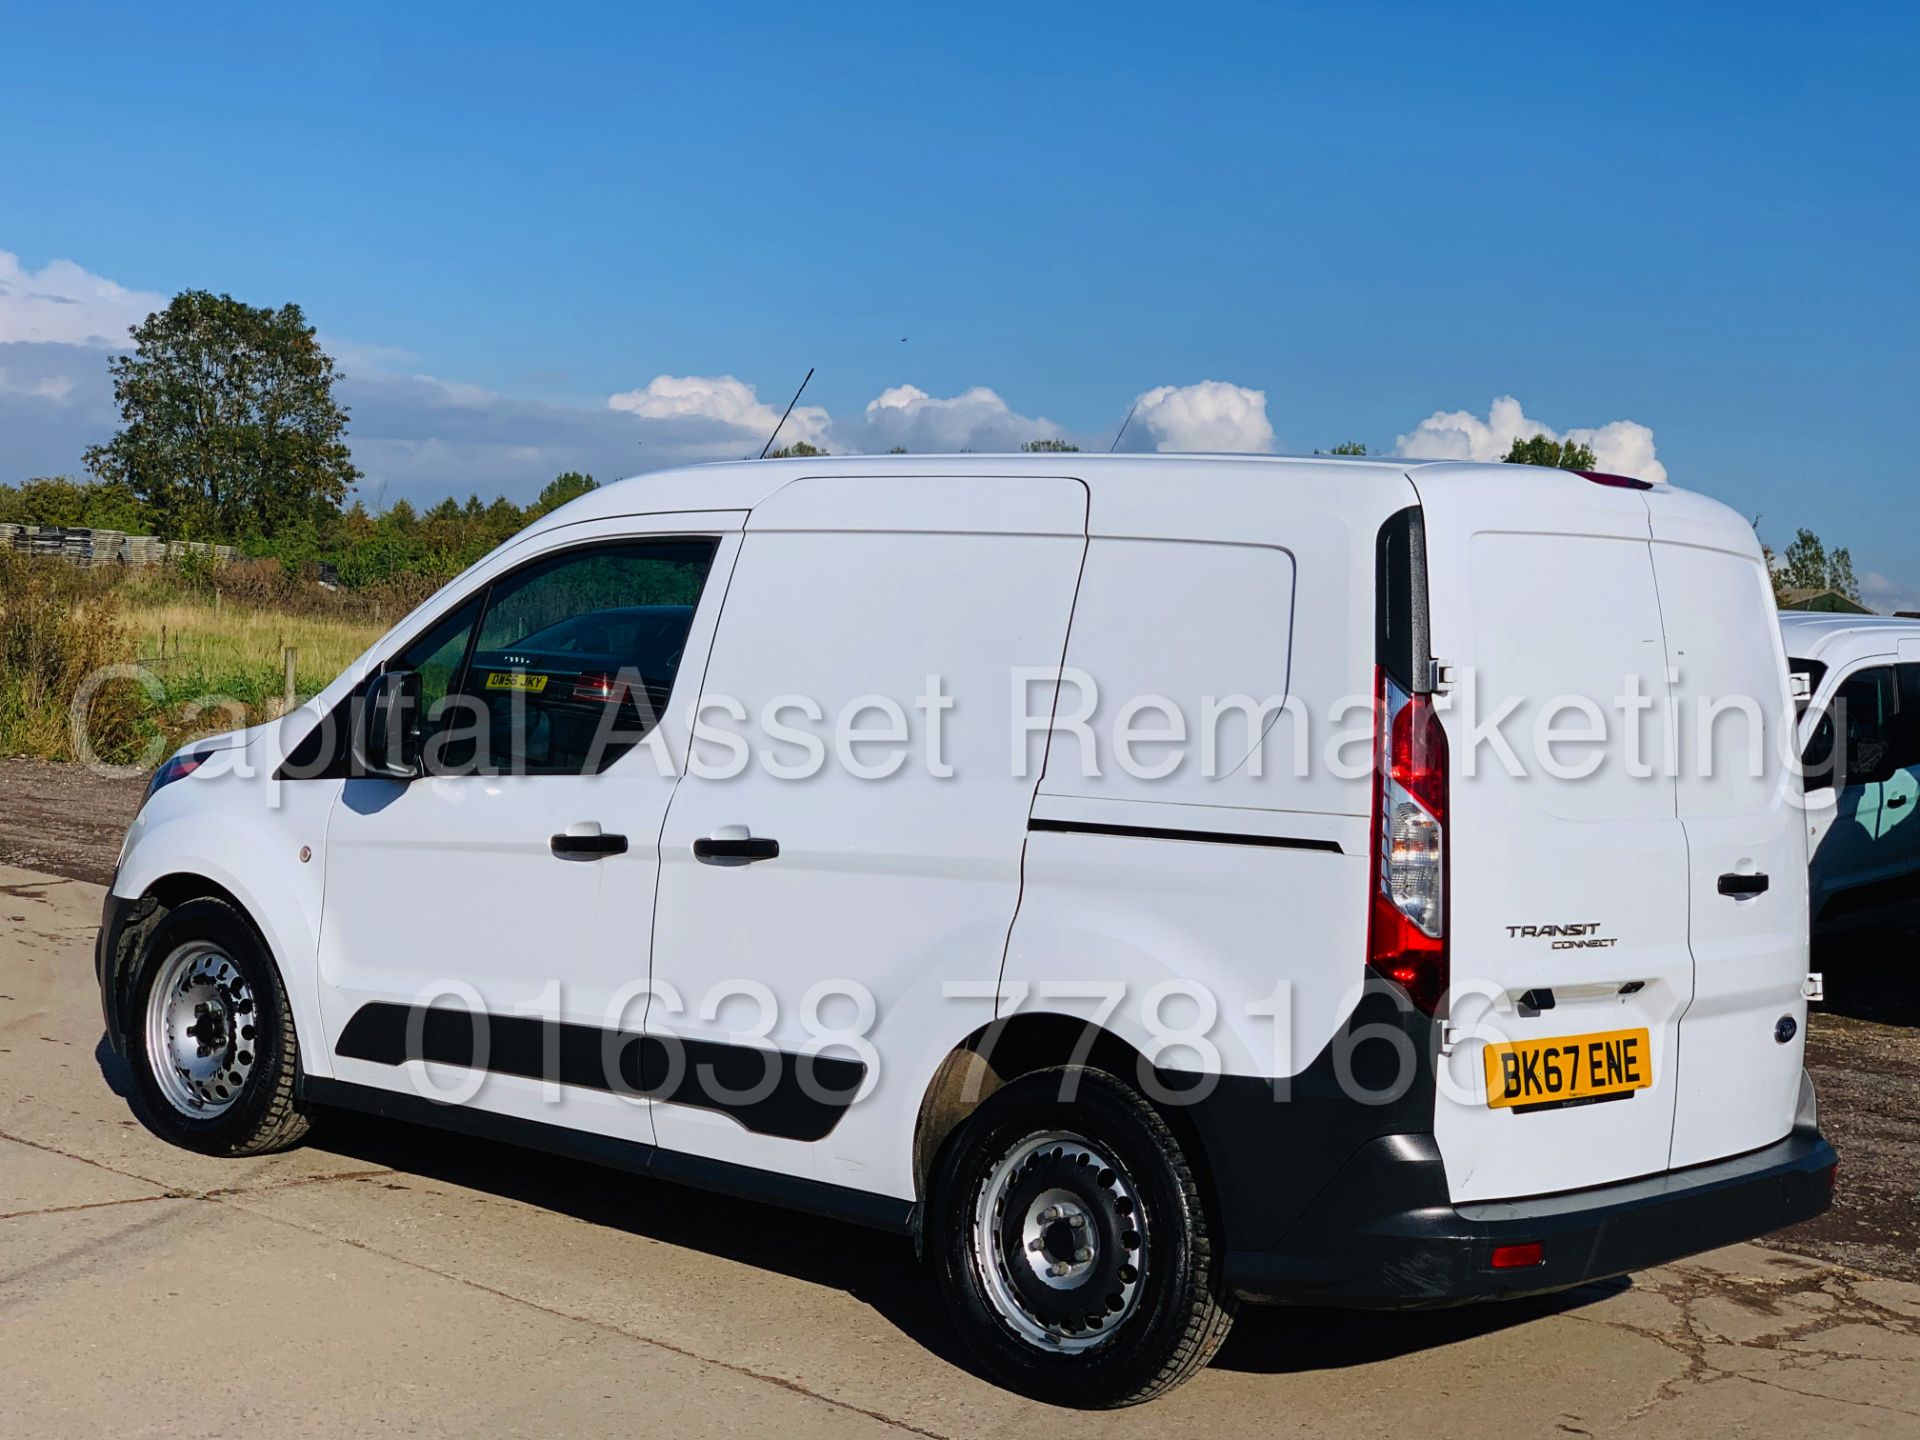 FORD TRANSIT CONNECT *SWB* (2018 - EURO 6) '1.5 TDCI - 6 SPEED' (1 OWNER) *U-LEZ COMPLIANT* - Image 9 of 37